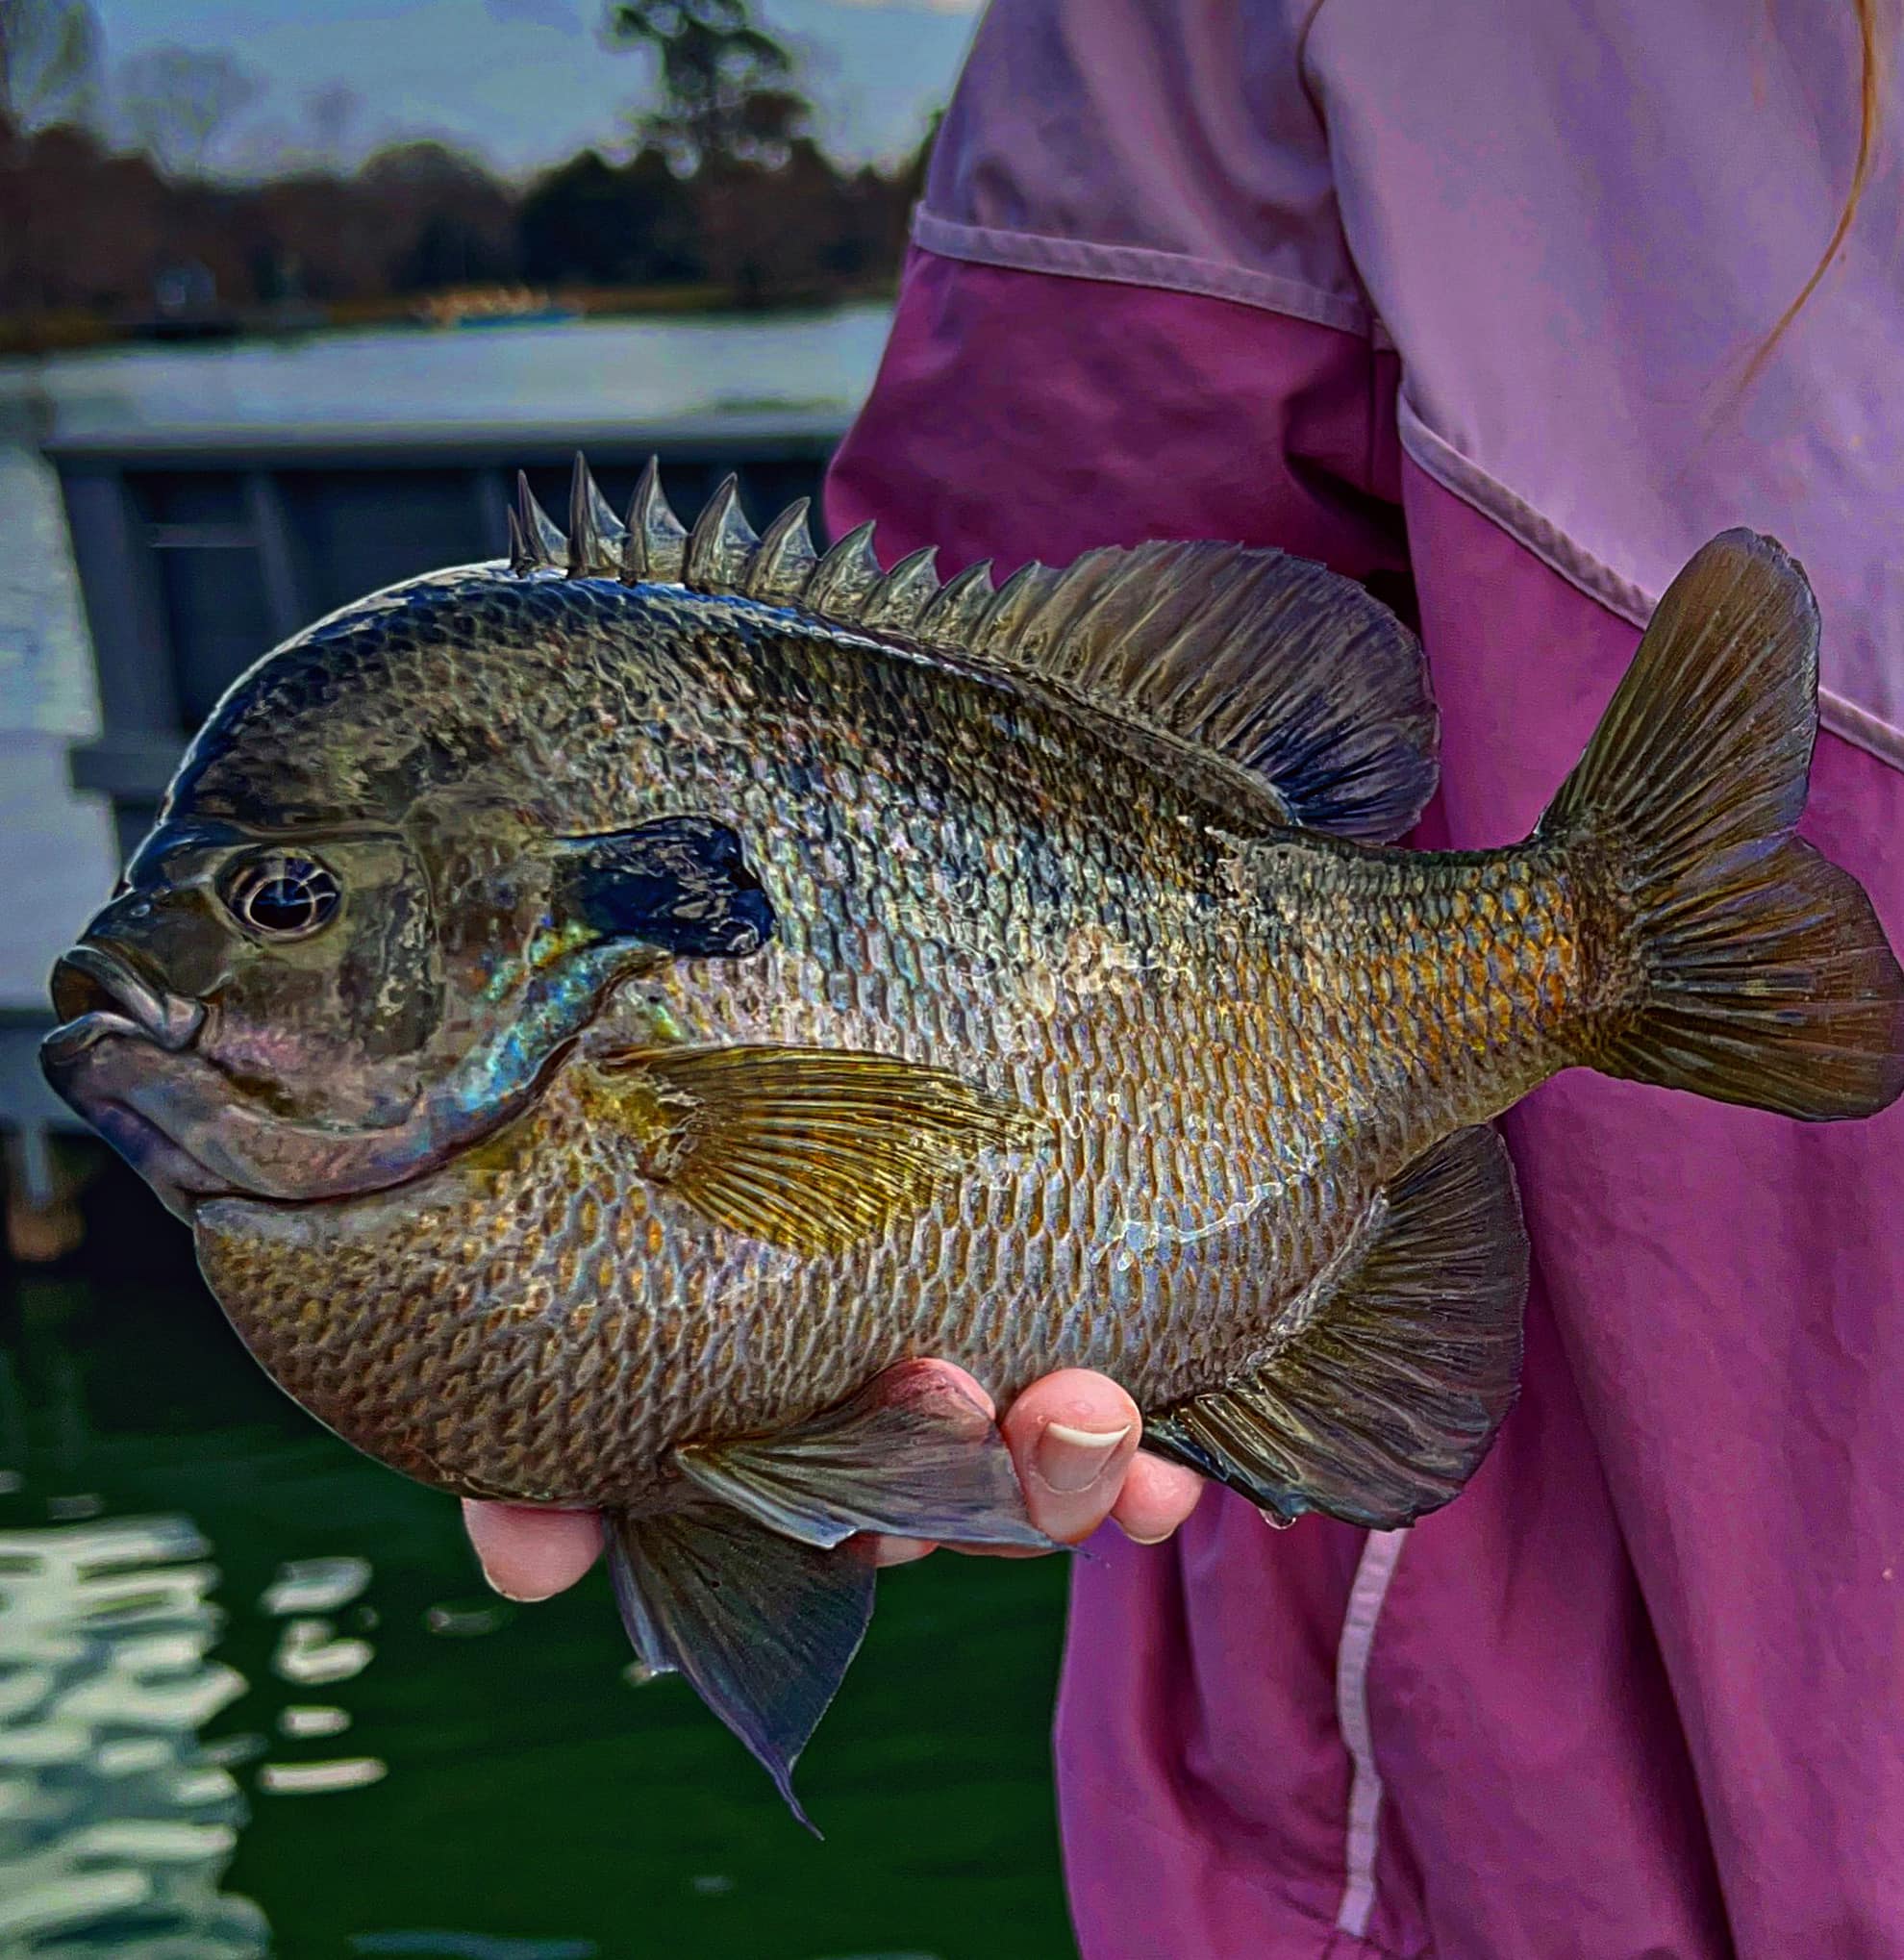 Meet the Alabama Angler on a Mission to Grow the World-Record Bluegill